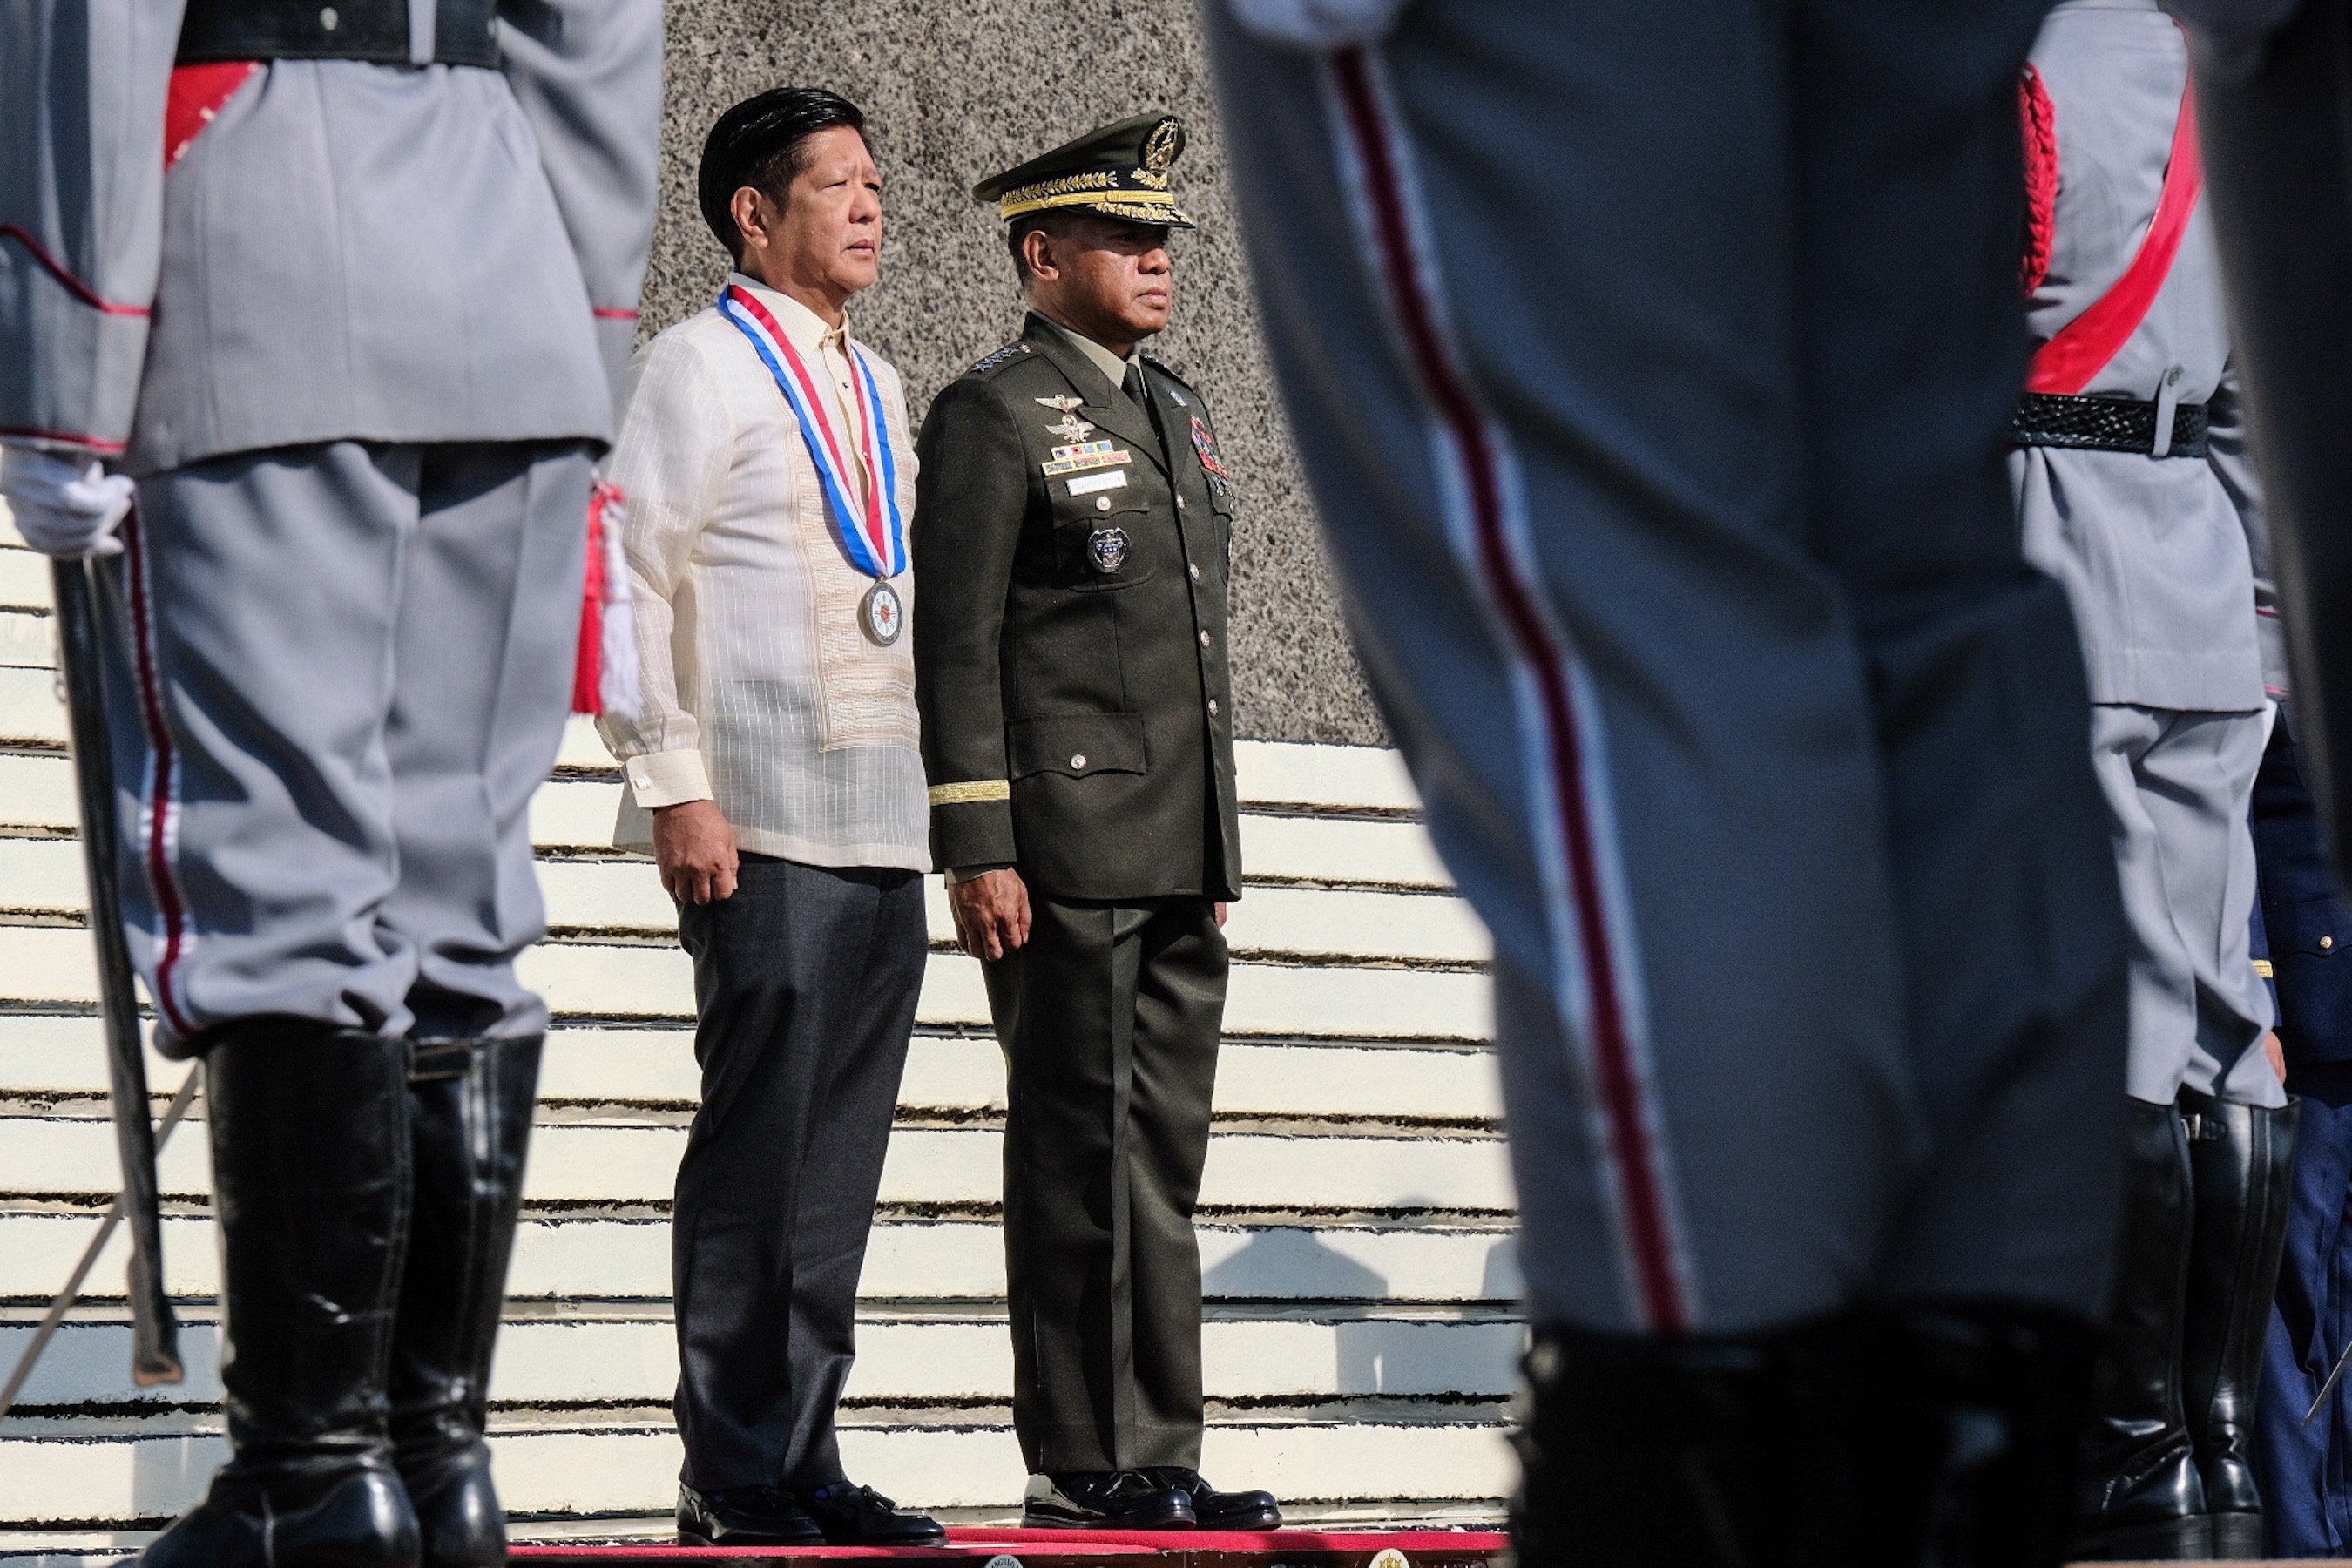 Philippine President Ferdinand Marcos Jnr (left) stands with armed forces chief General Romeo Brawner as they mark the ‘Day of Valor’ in Bataan province on Tuesday. Marcos Jnr’s own website has reportedly been targeted by hackers. Photo: EPA-EFE